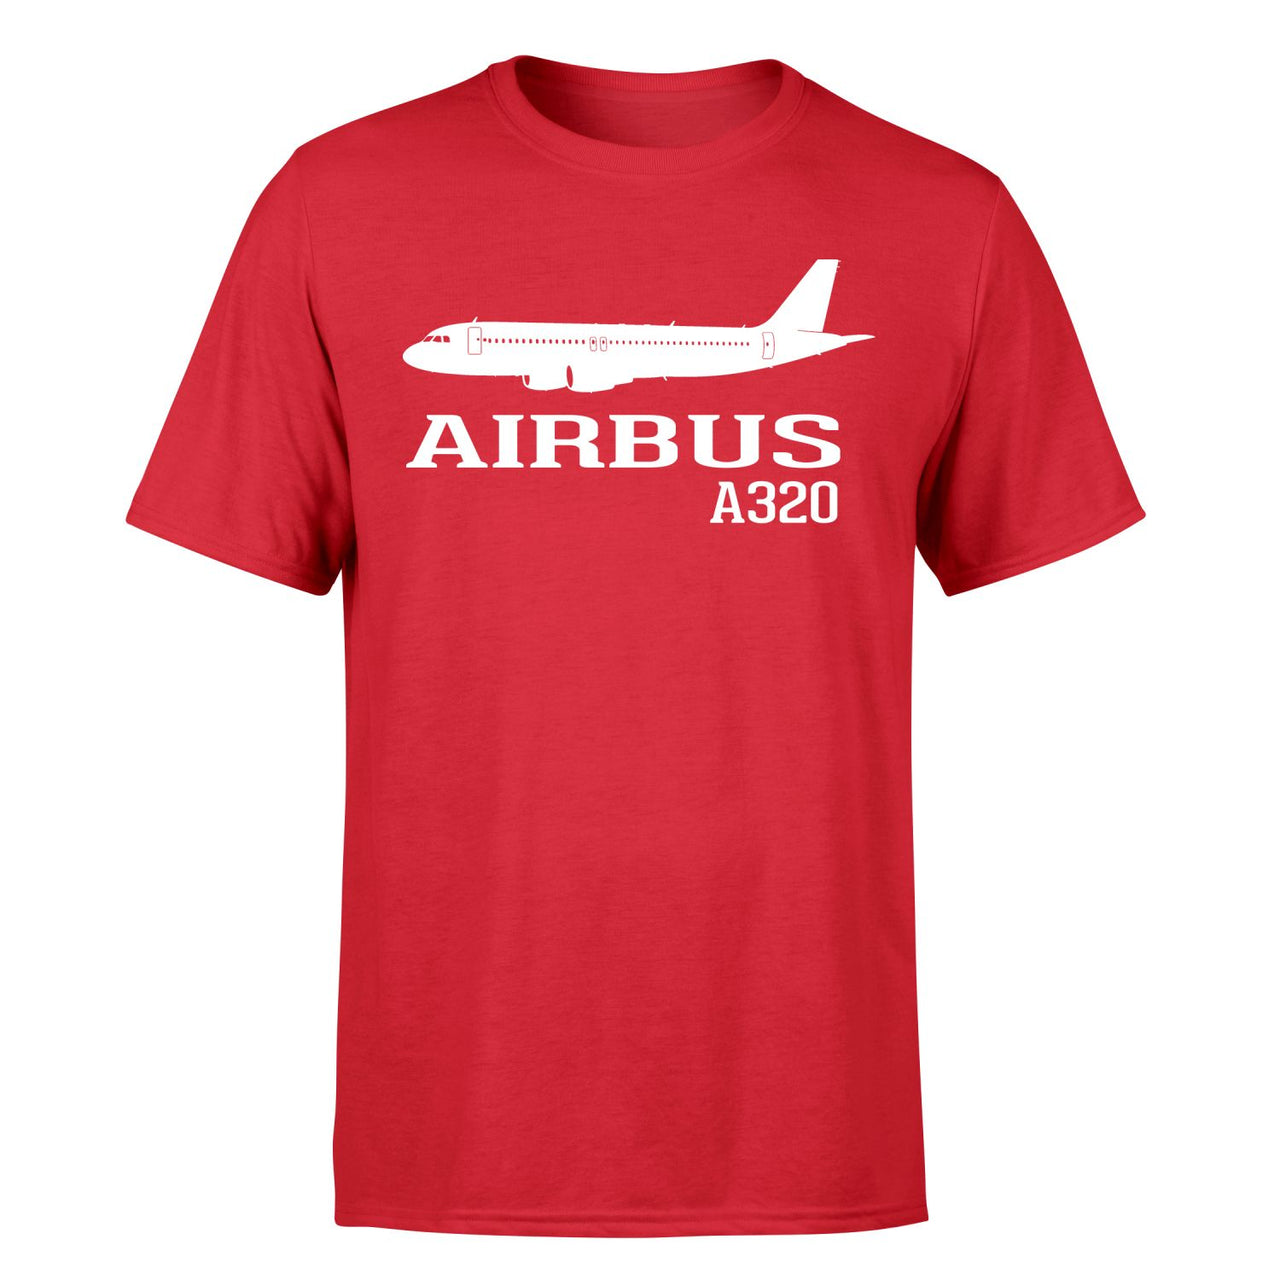 Airbus A320 Printed Designed T-Shirts